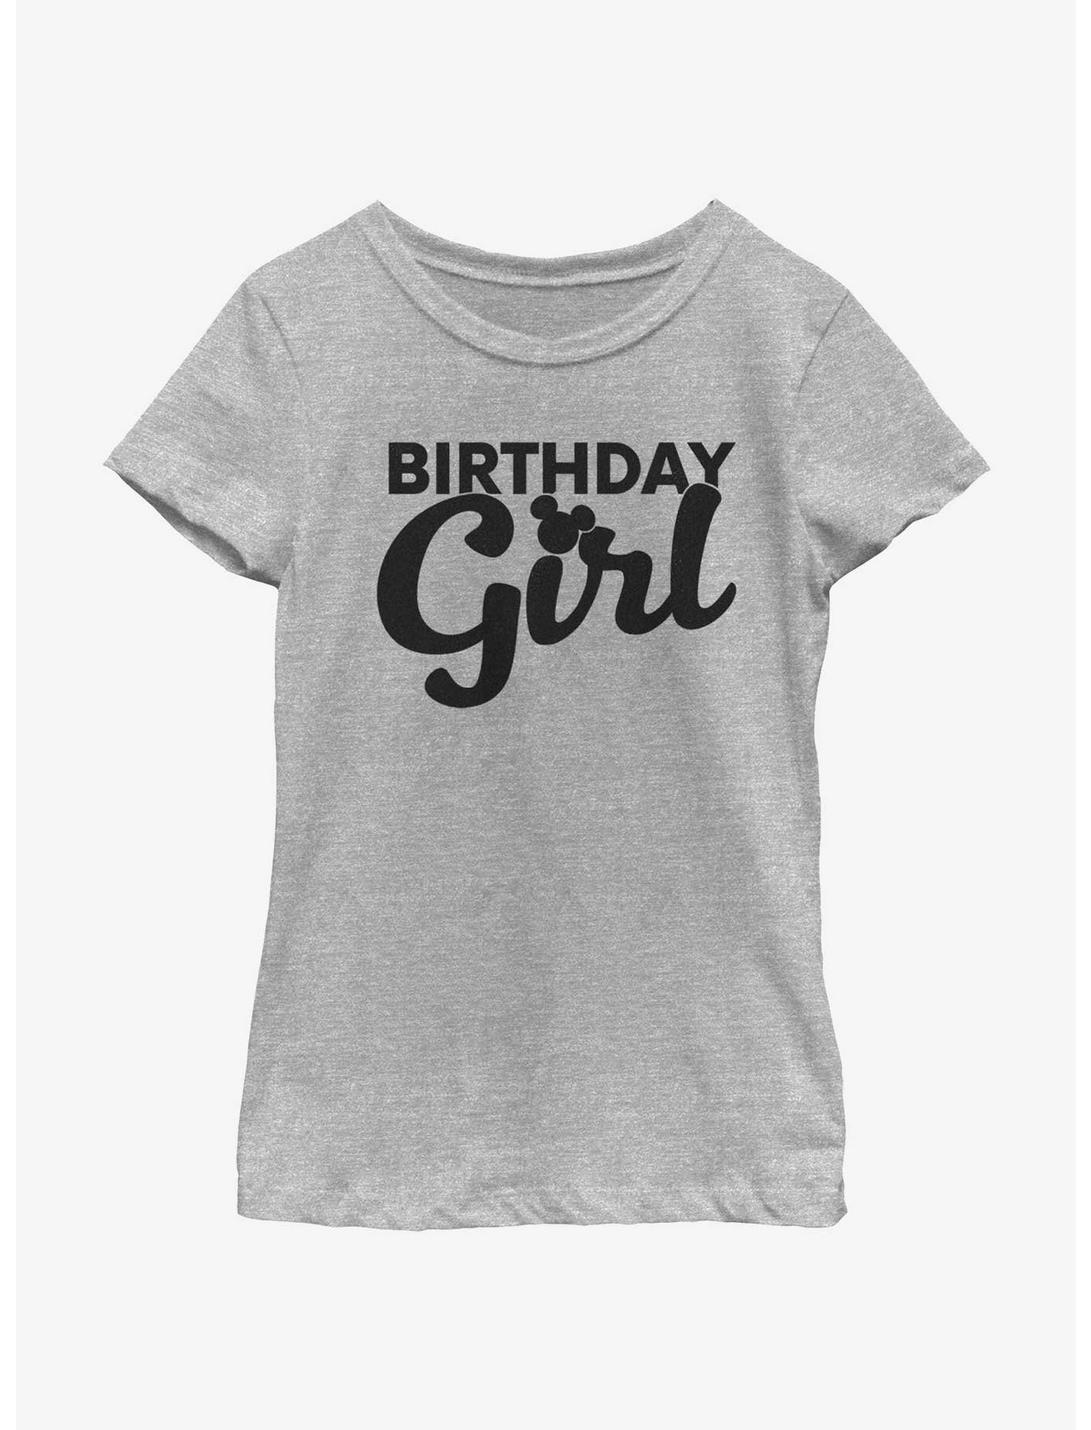 Disney Mickey Mouse Birthday Girl Girls Youth T-Shirt, ATH HTR, hi-res